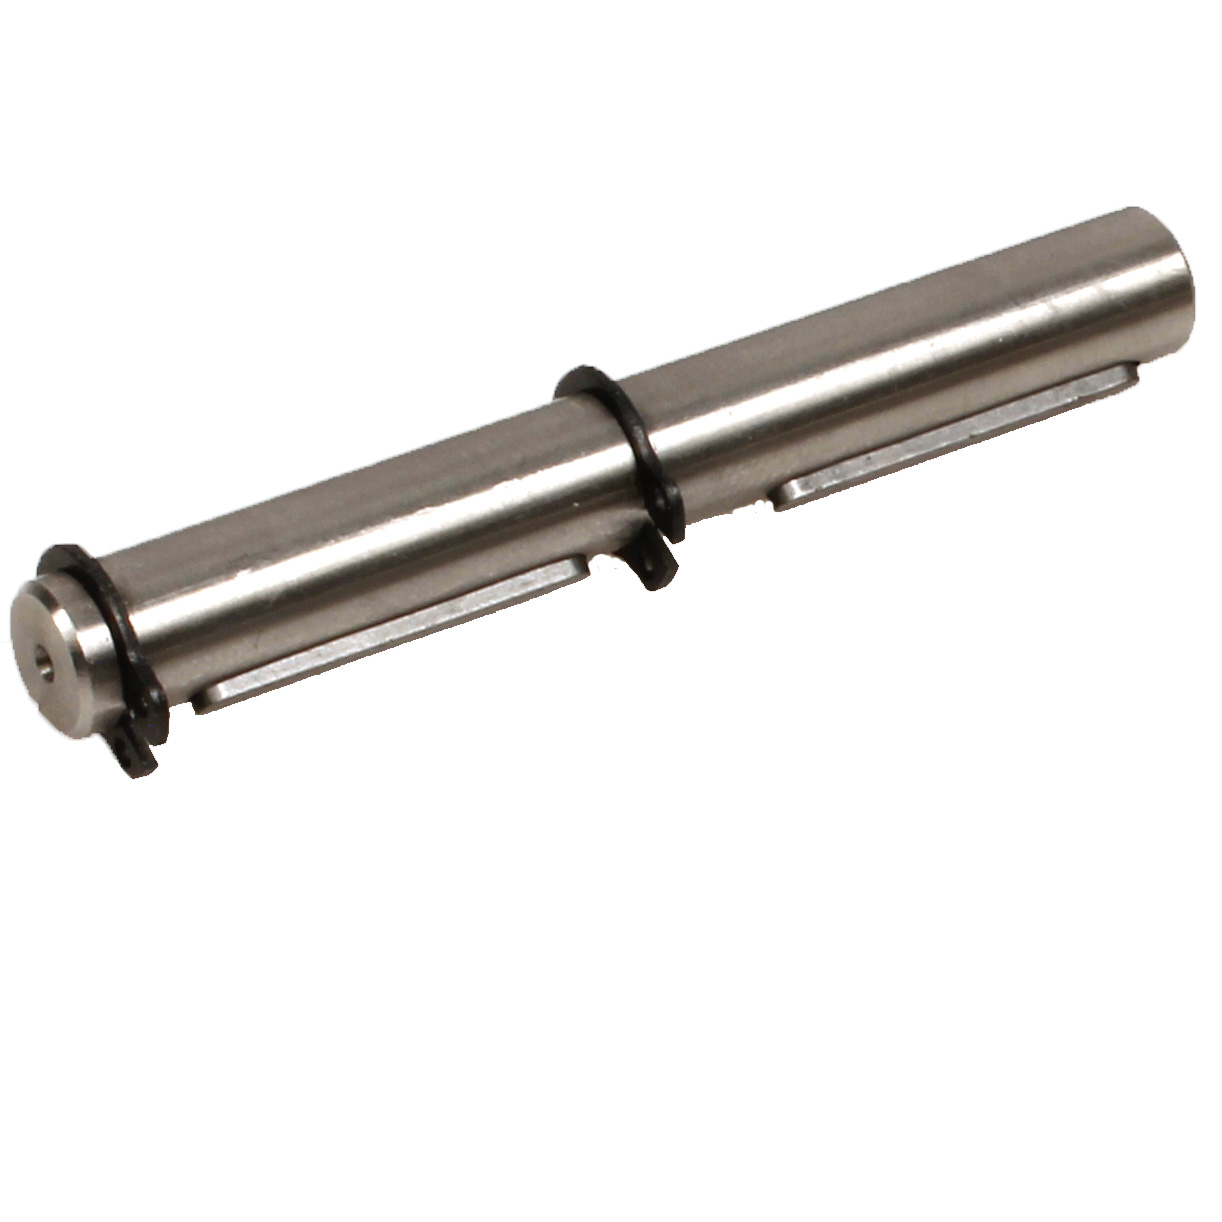 Optional output shaft stainless steel - P gearboxes single sided output shaft -  - 